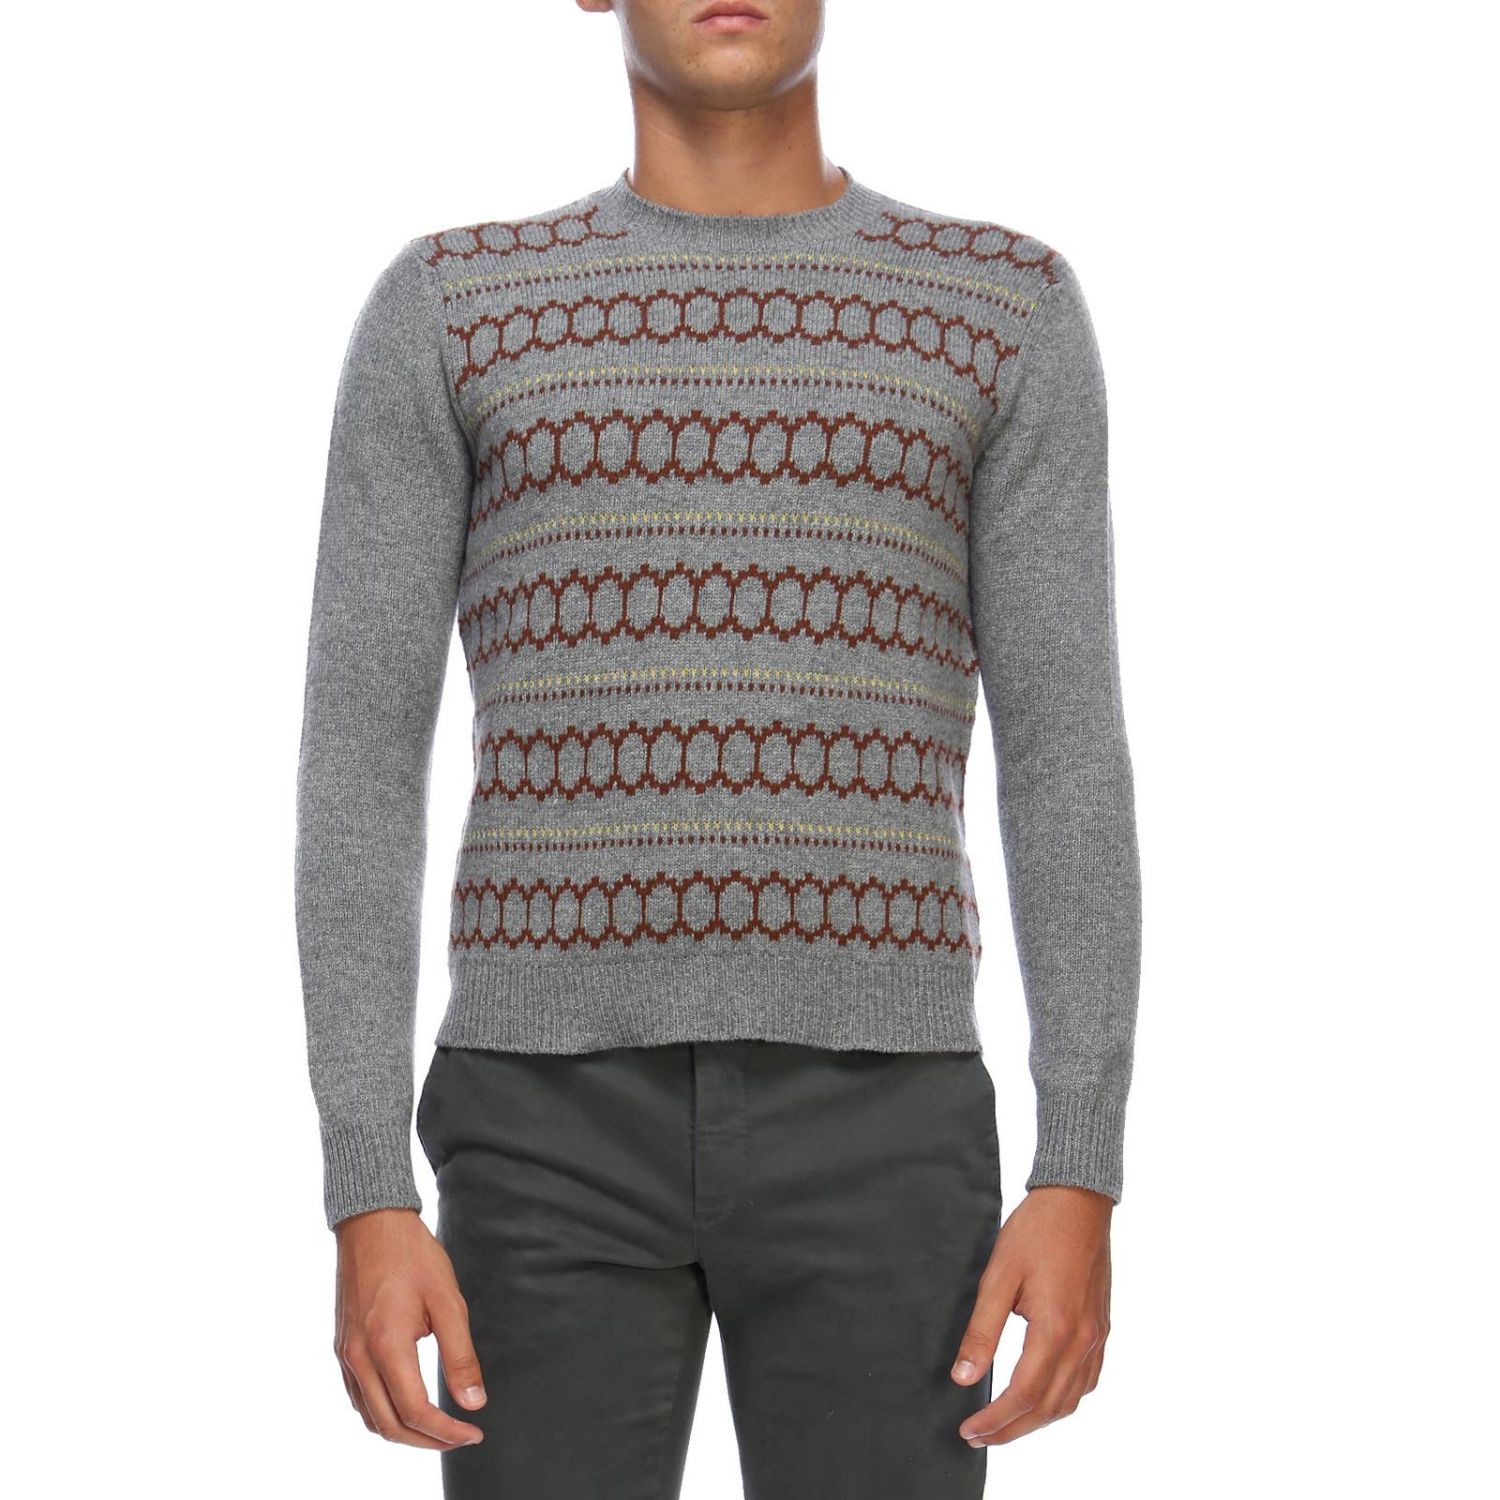 PRADA: Crew-neck pullover in blend wool and fantasy cashmere | Sweater ...